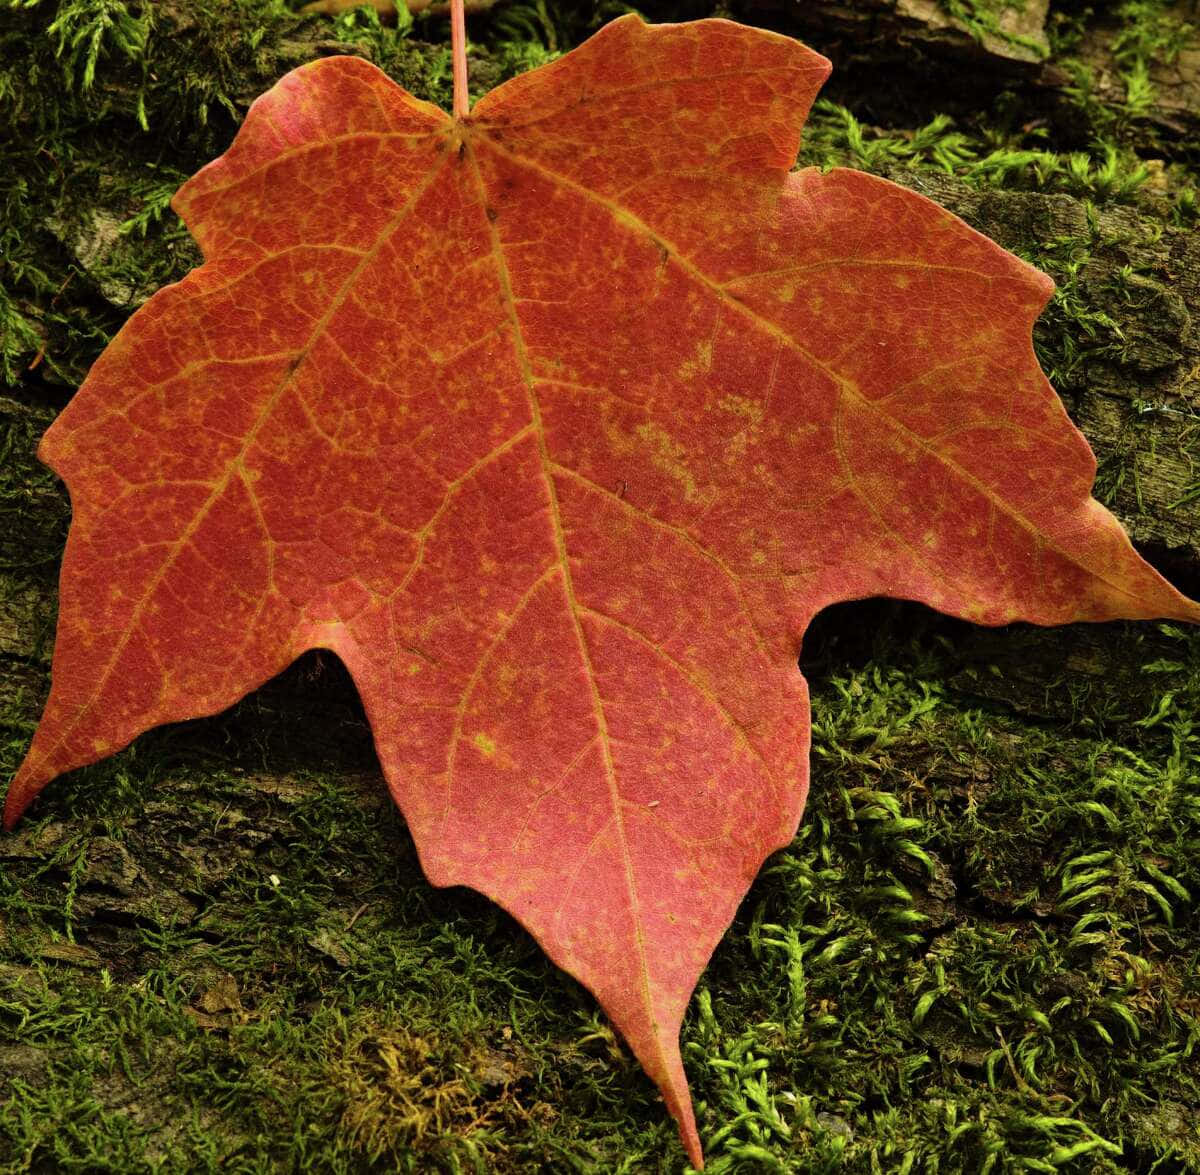 The beauty of the Maple Leaf - a symbol of Canada